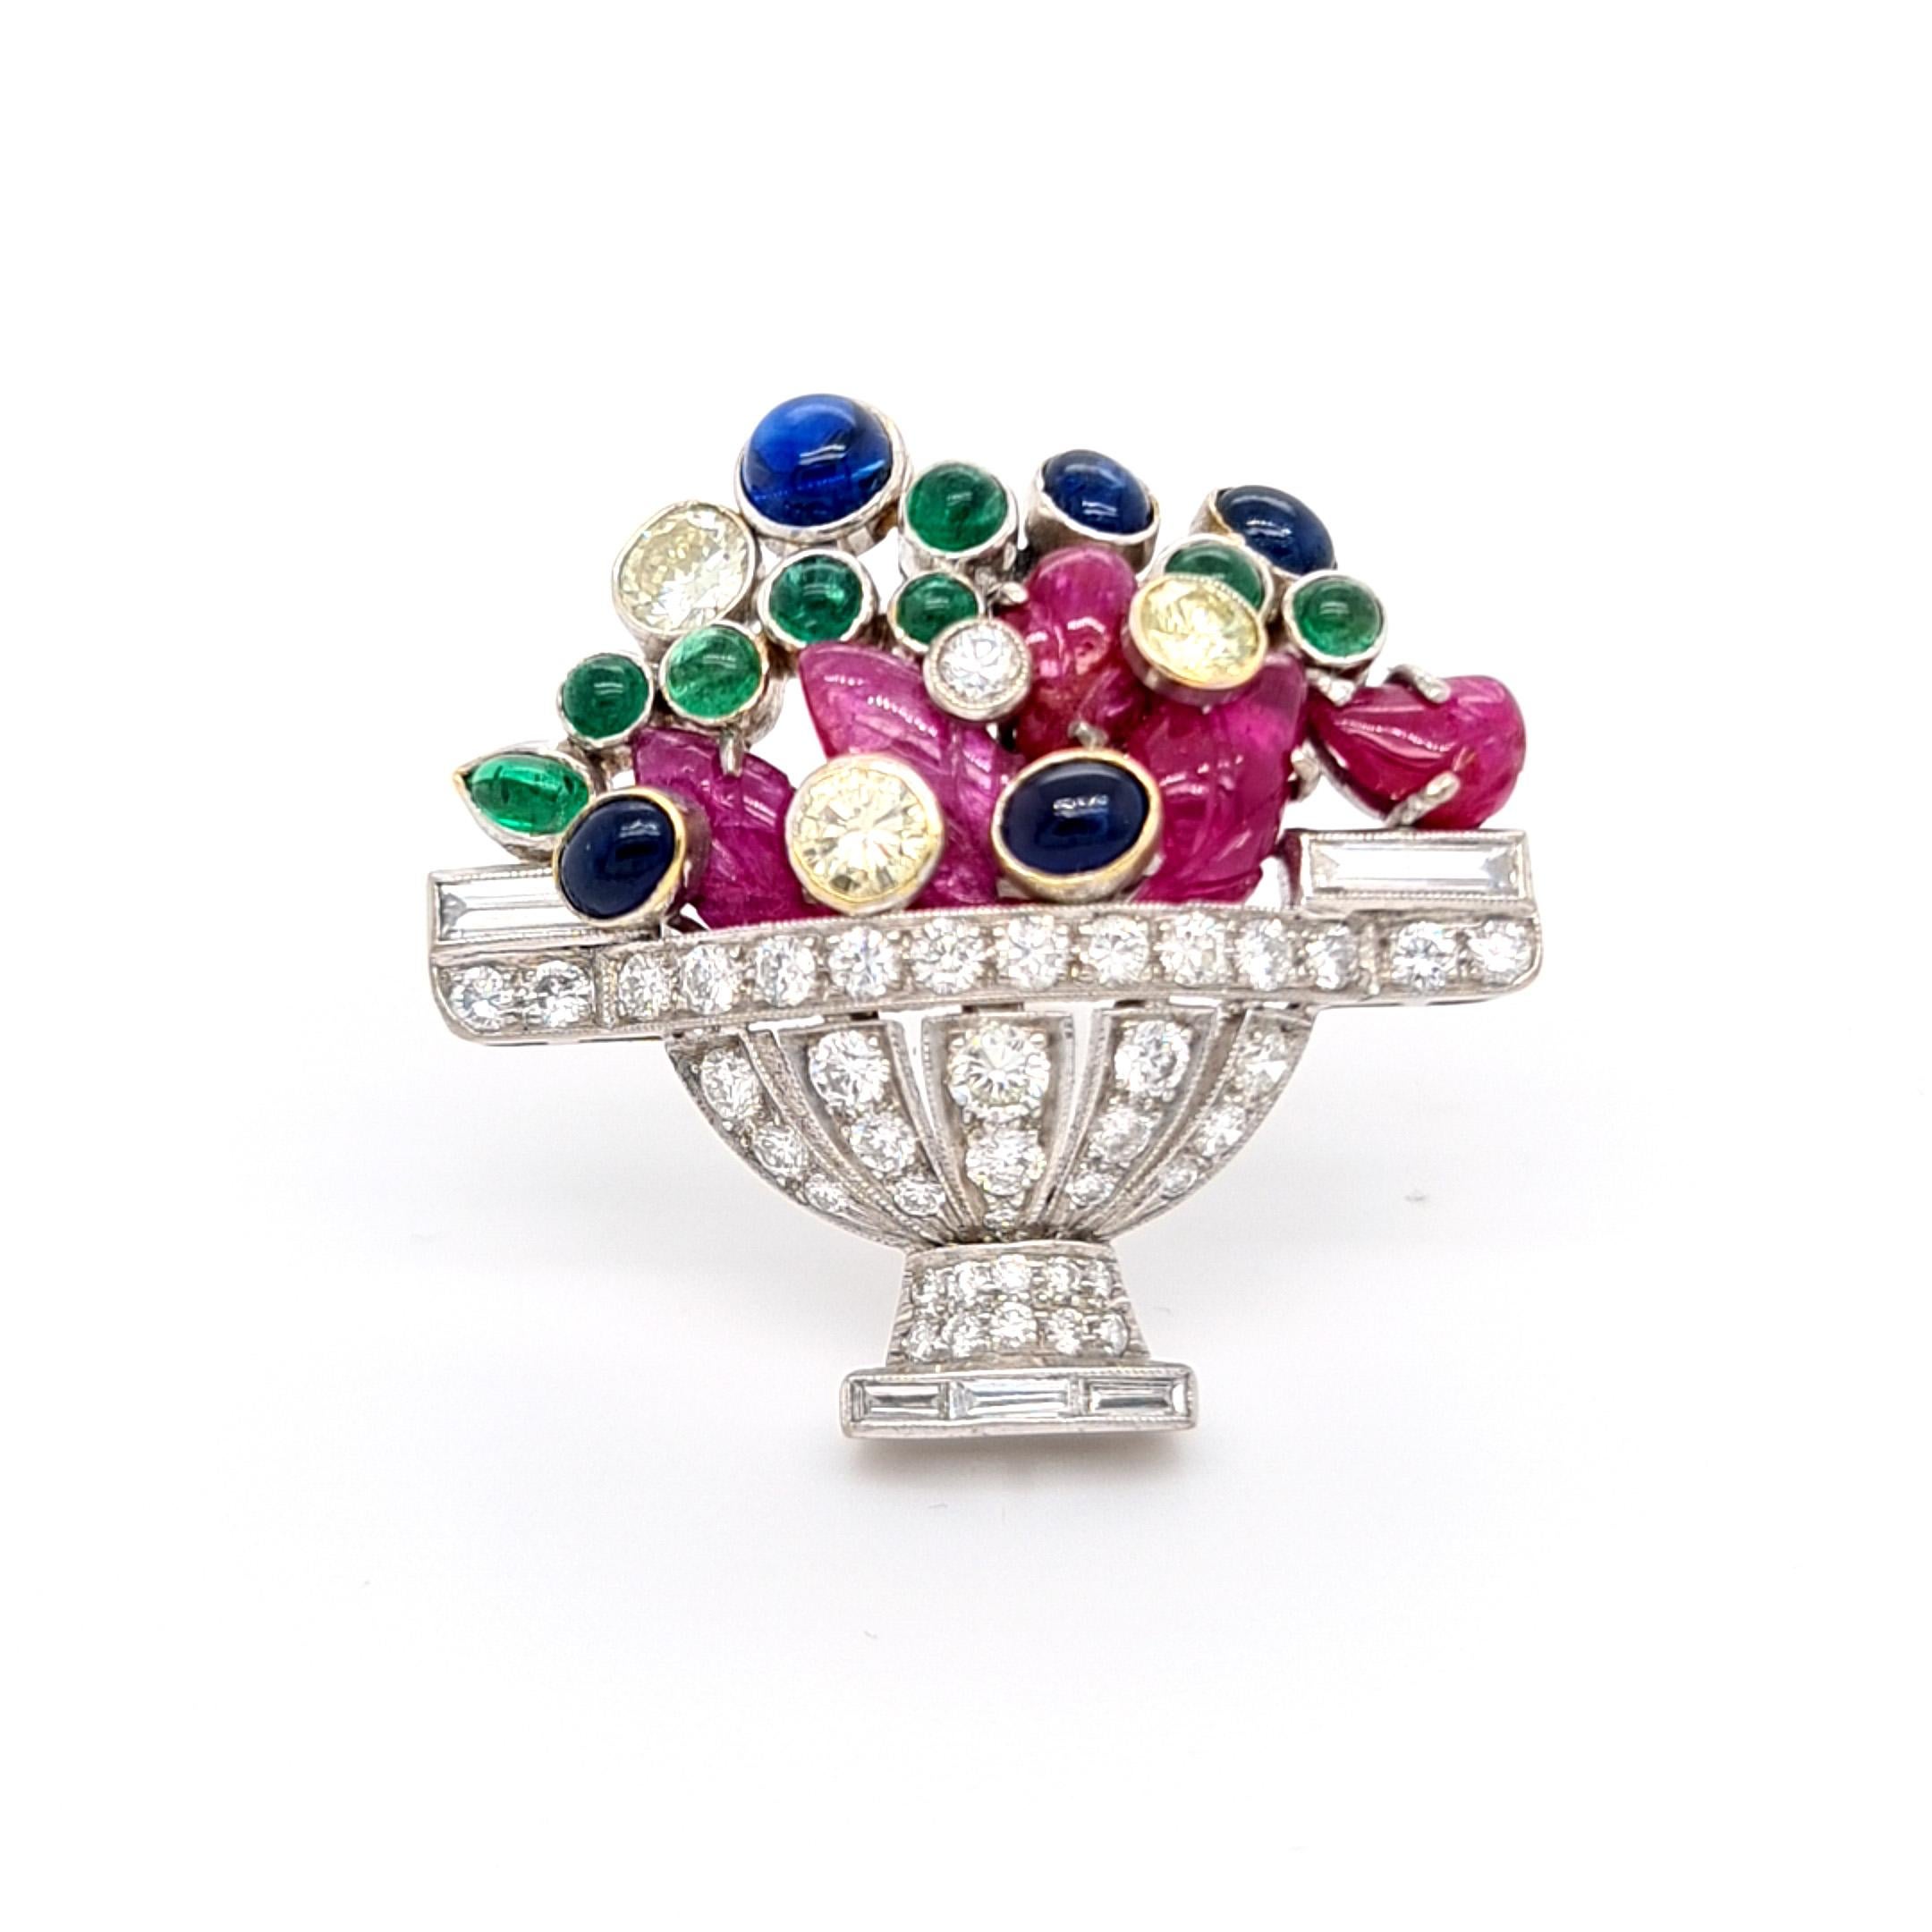 A Jardiniére brooch, mounted in platinum, with a diamond bowl set with round brilliant and baguette-cut diamonds, with carved rubies and cabochon-cut sapphires and emeralds depicting the flowers. Circa 1960.